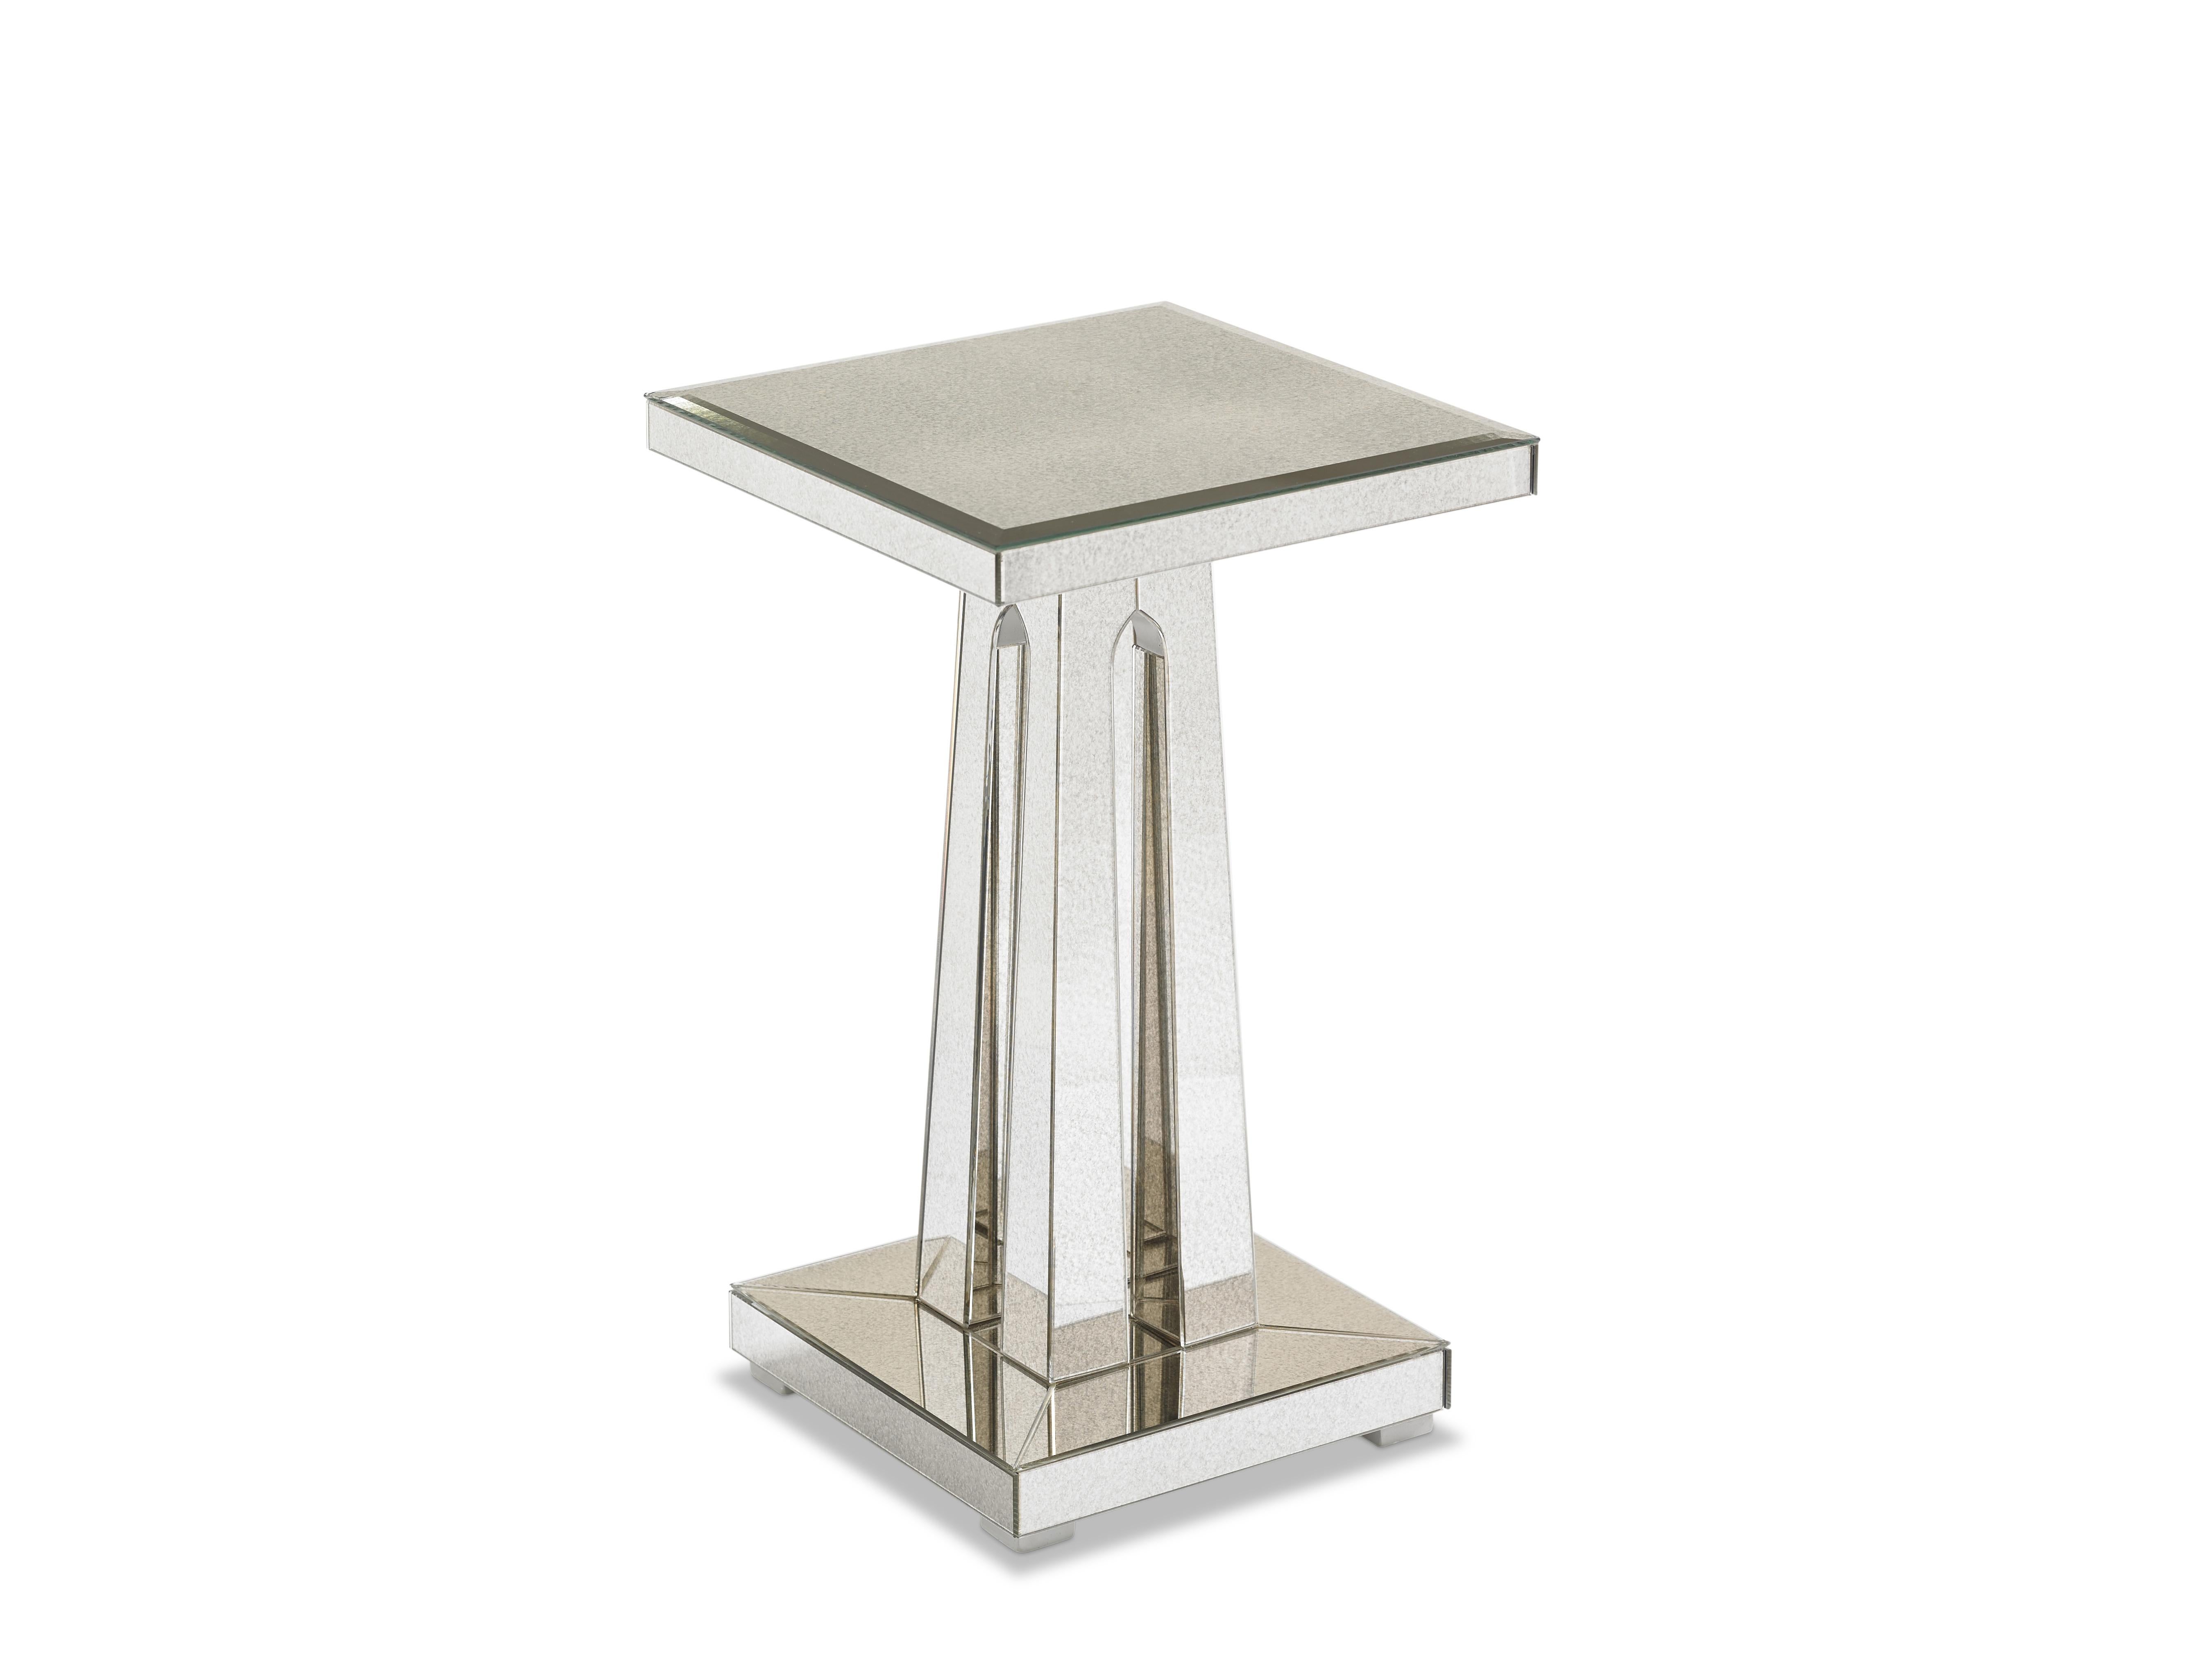 Mirrored furniture is a great way to make even the smallest of rooms feel big and airy, thanks to its light reflecting abilities. This table, finished in antique mirror, will sink into a room and the square top and pedestal base means it’s the